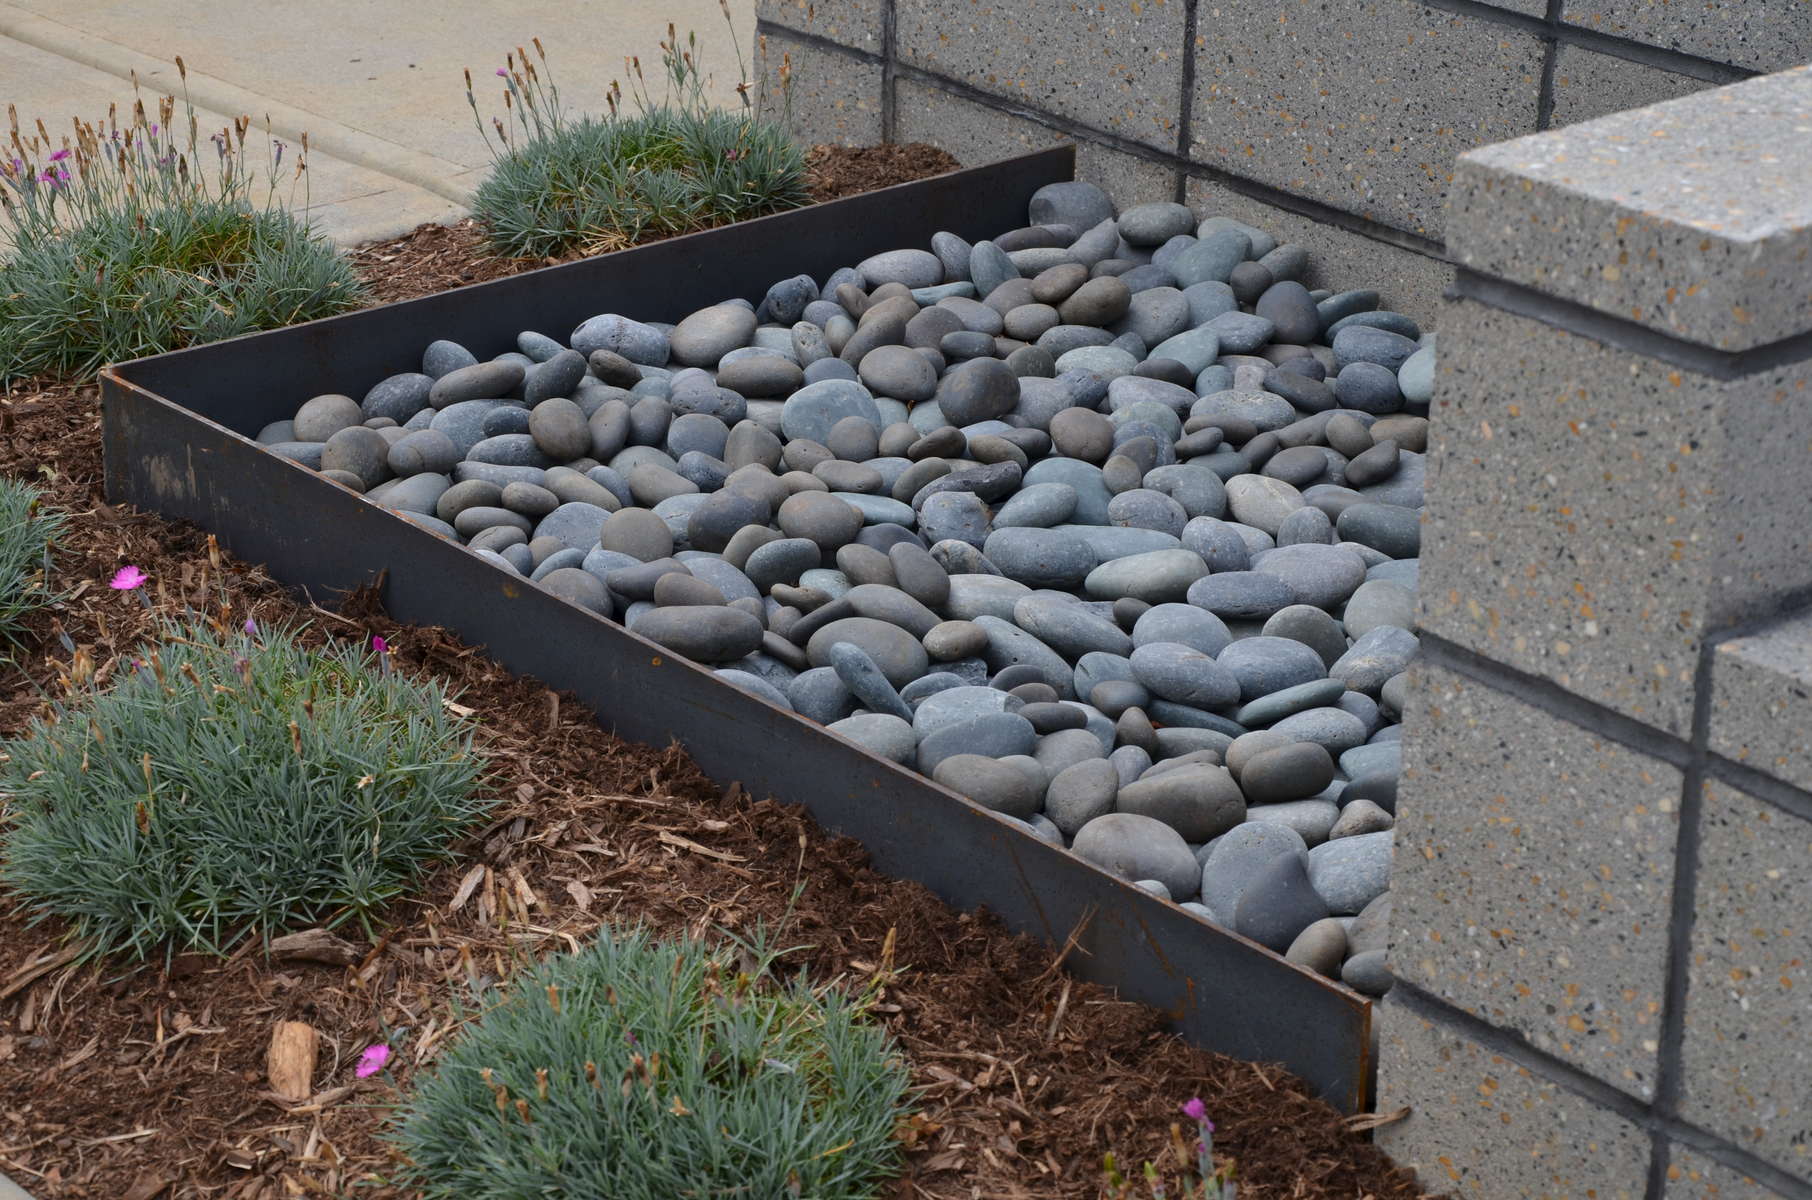 This area becomes a place to position an ornamental pot atop the beach pebbles.The edging surround features Cor-ten steel which will age to a sepia patina over time. 